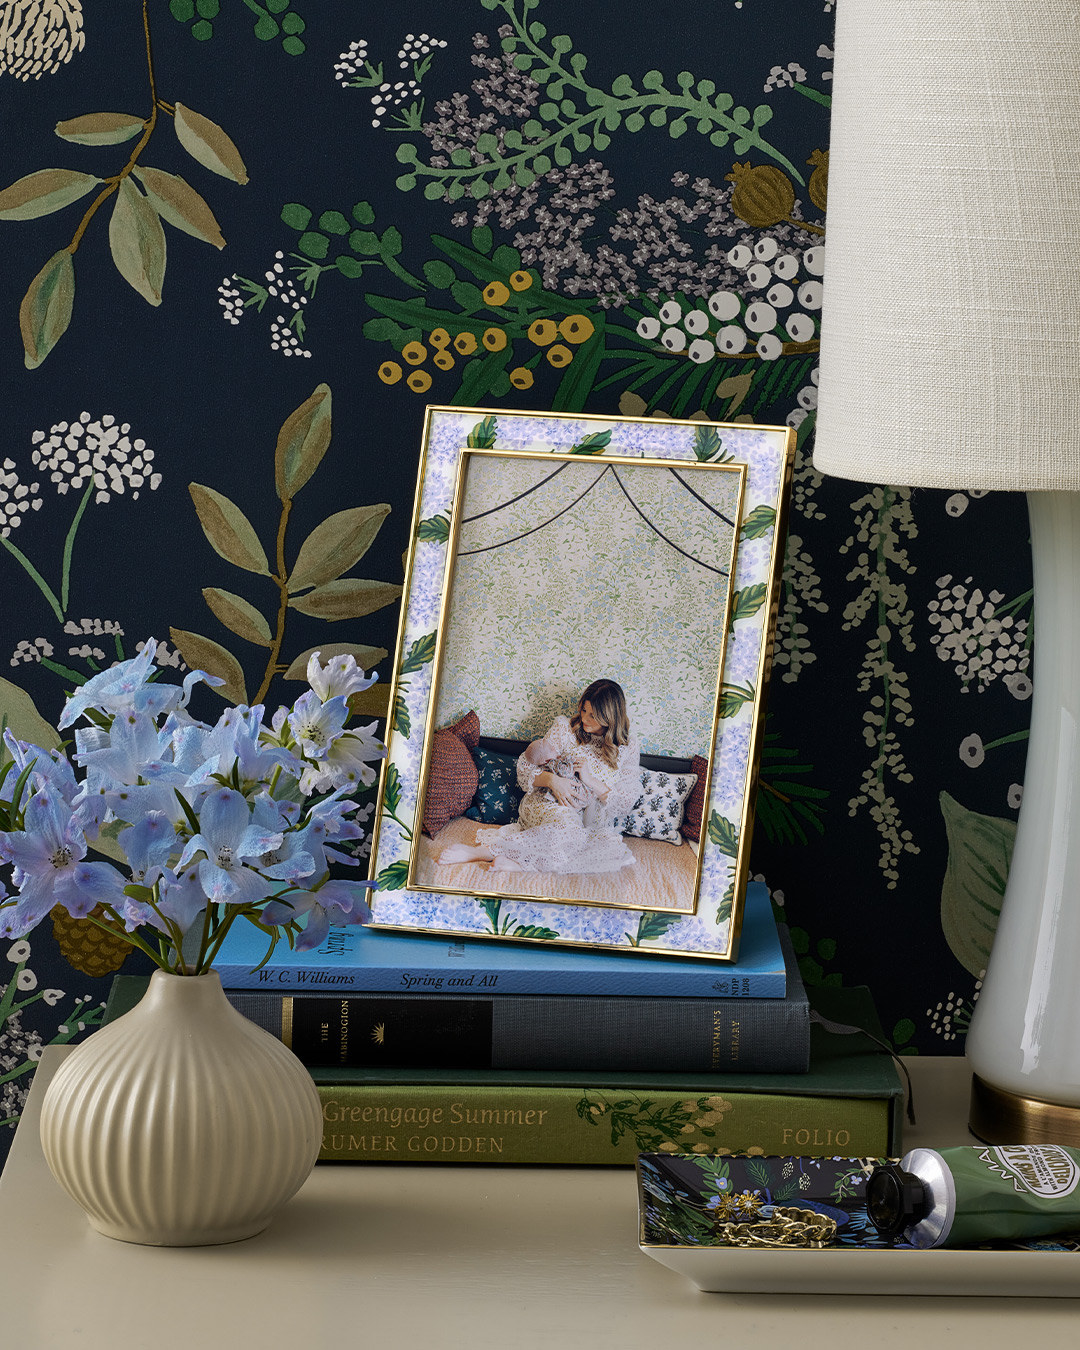 a picture frame with blue hydrangeas as the artwork around the frame